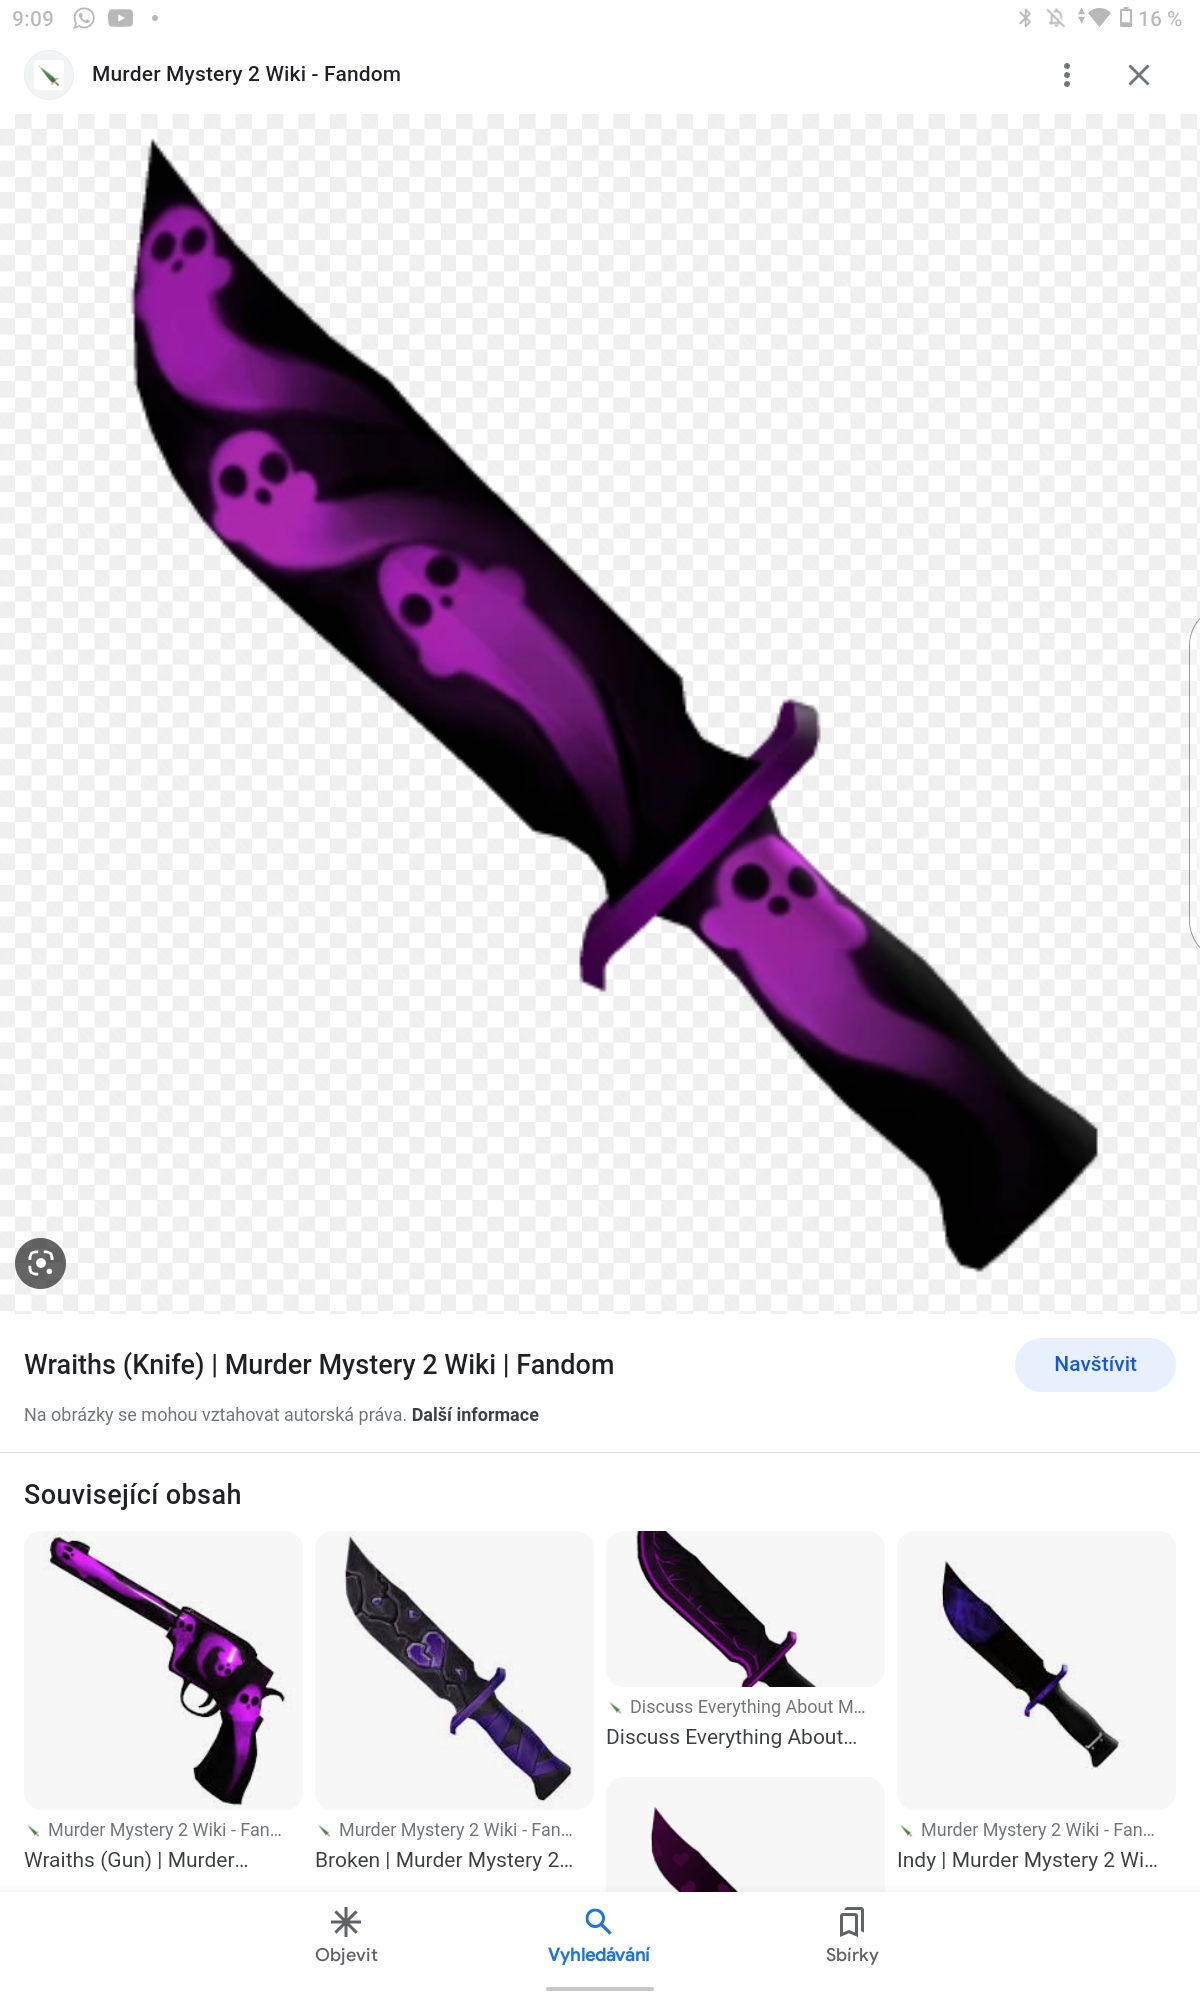 I looking wraiths knife for my Sister 💜